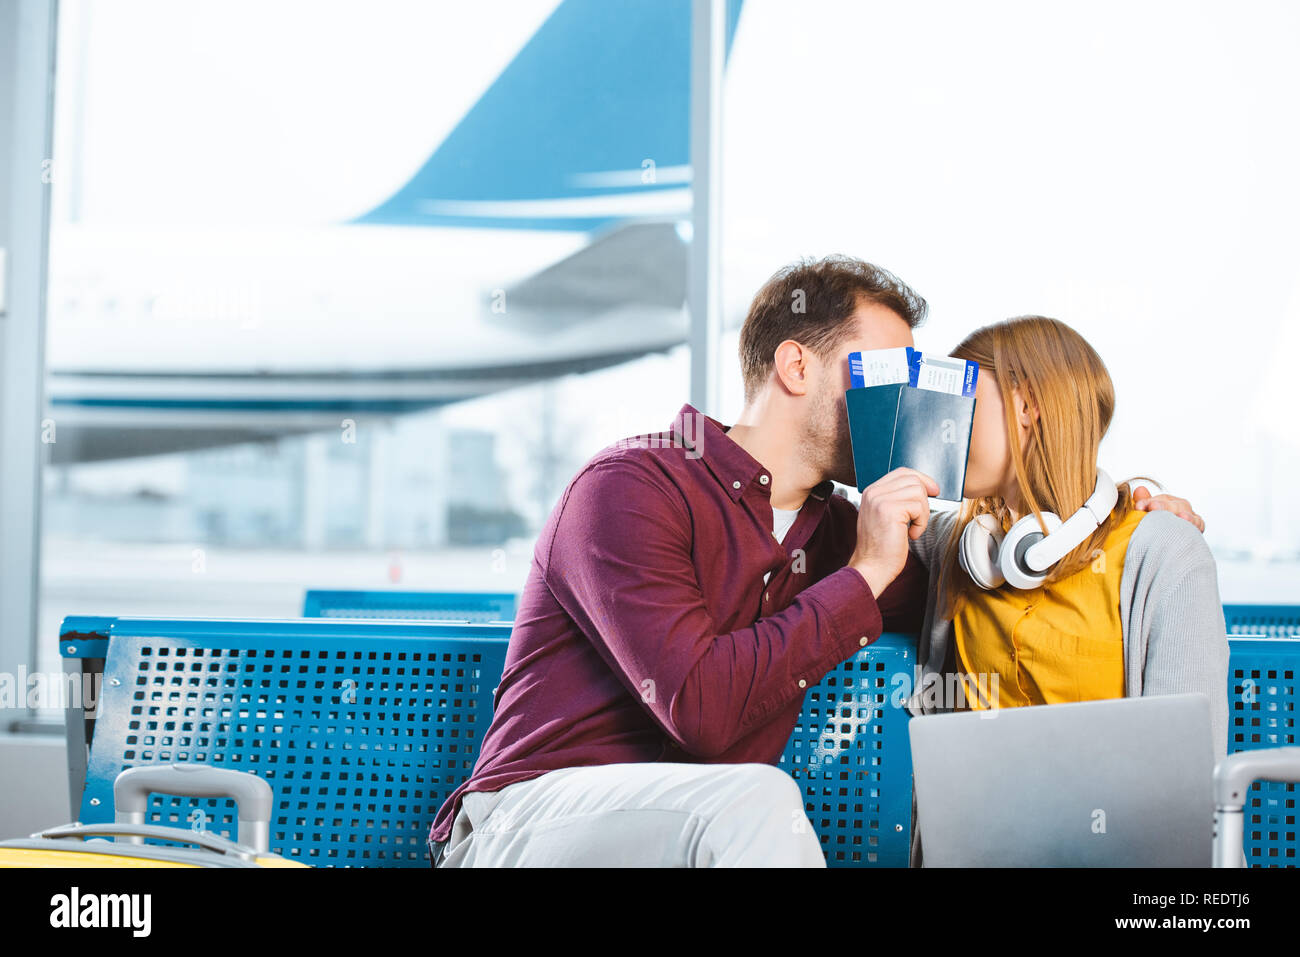 boyfriend and girlfriend covering faces with passports in airport lounge Stock Photo